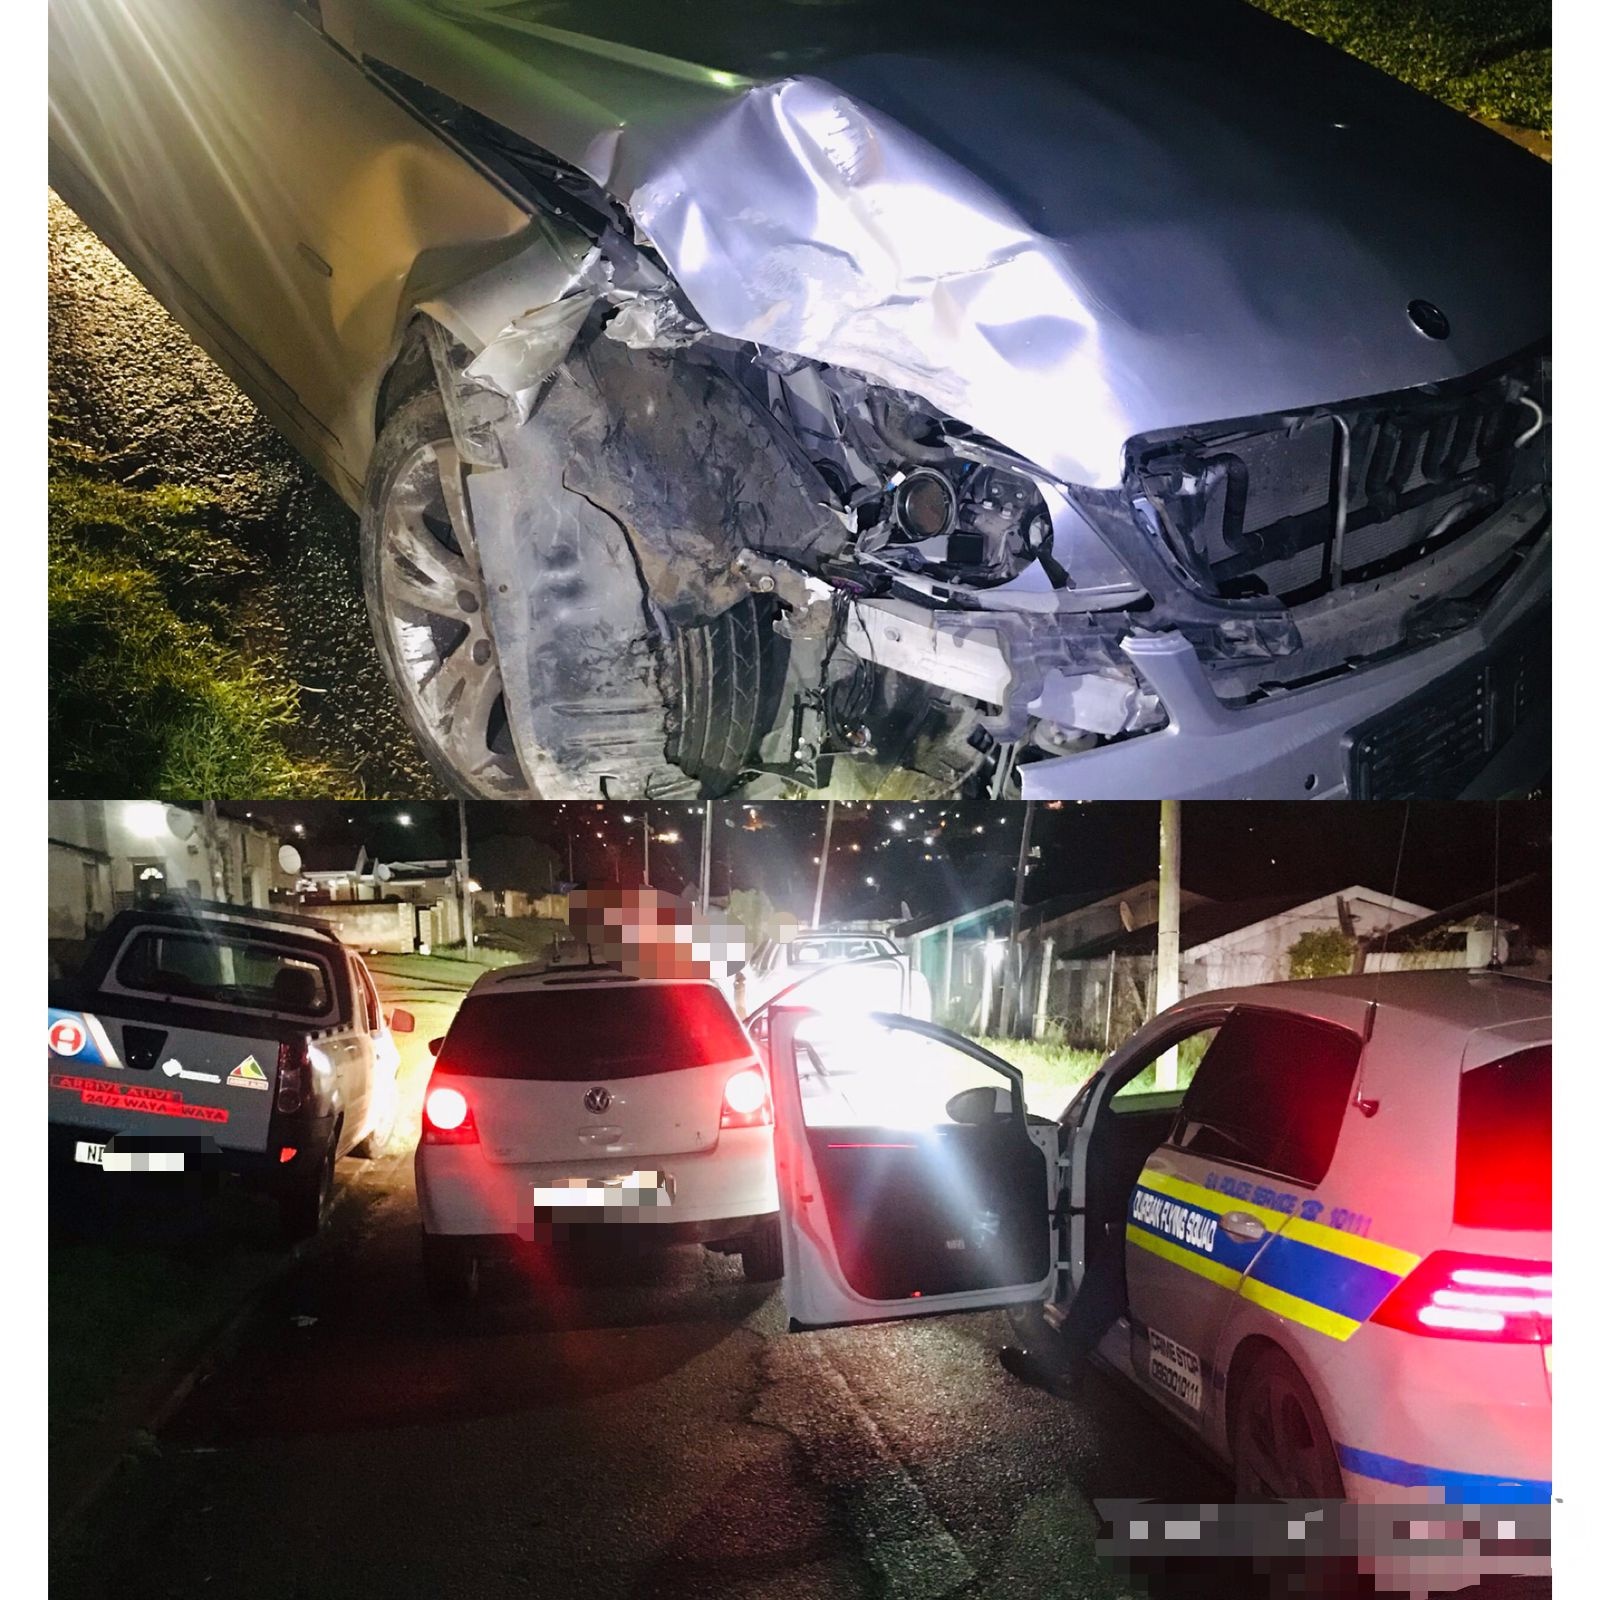 Successful vehicle recoveries following a house robbery